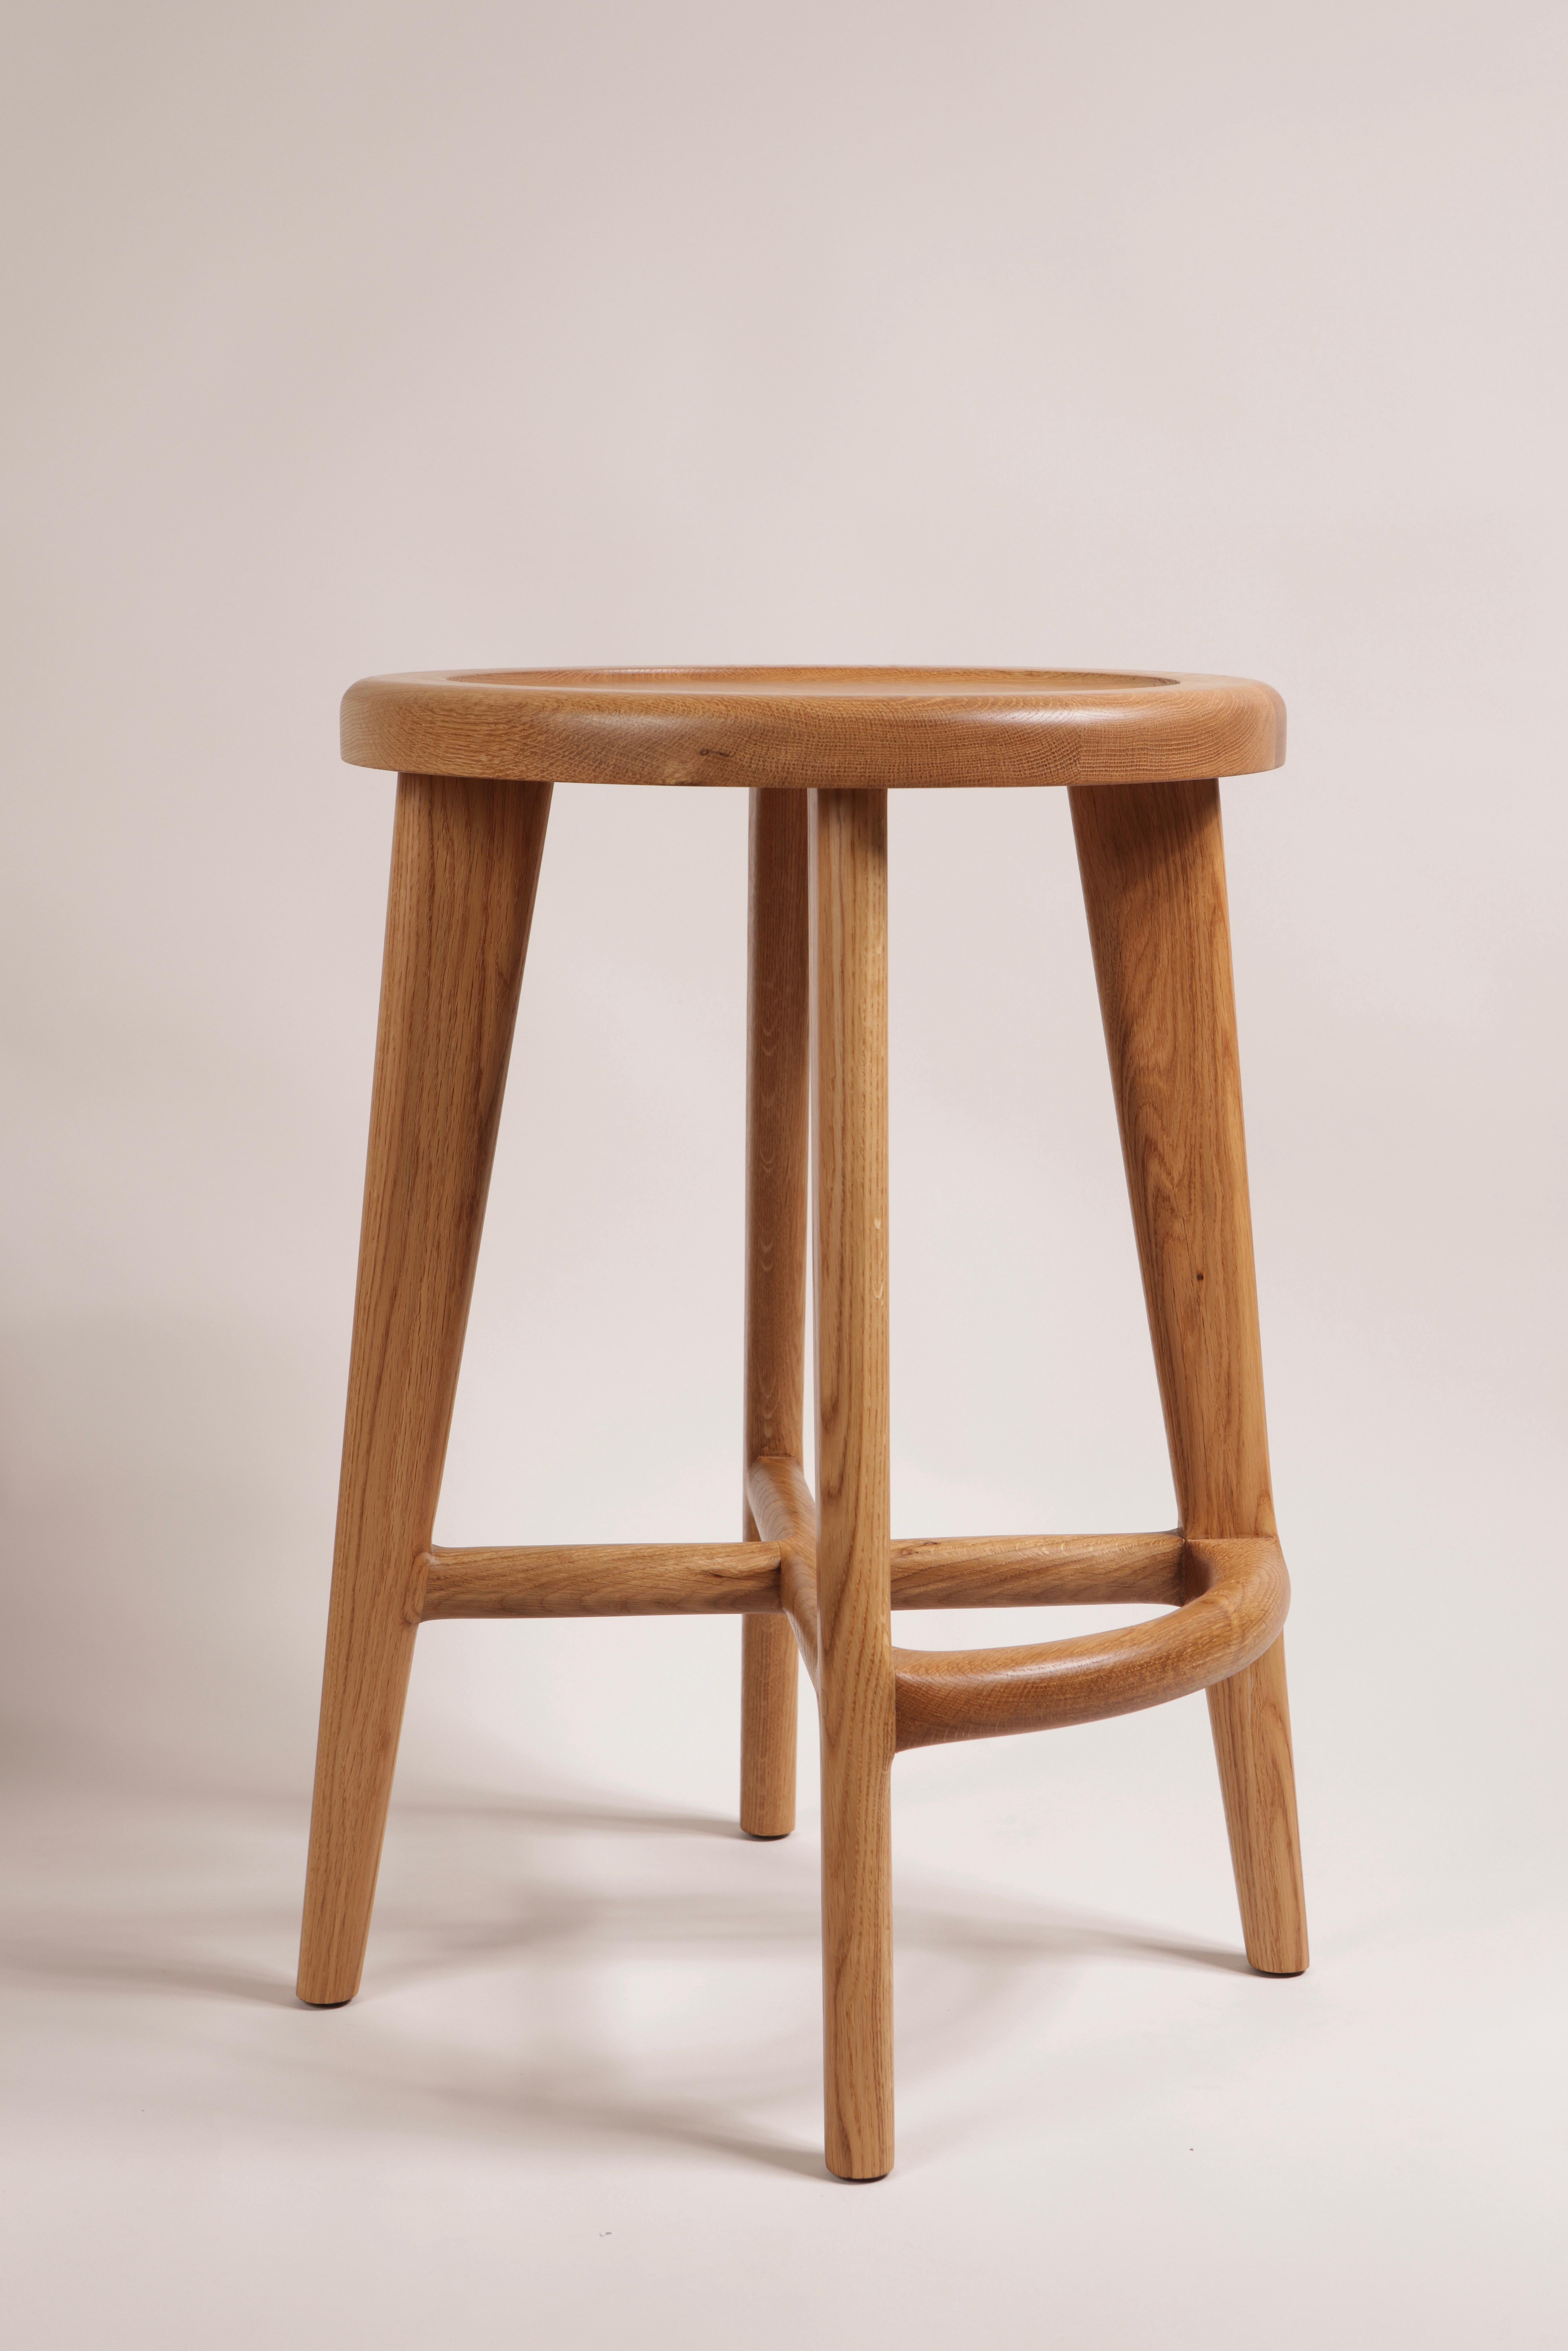 Handcrafted Solid Wood Bar or Counter Stool, White Oak In New Condition For Sale In Calgary, CA